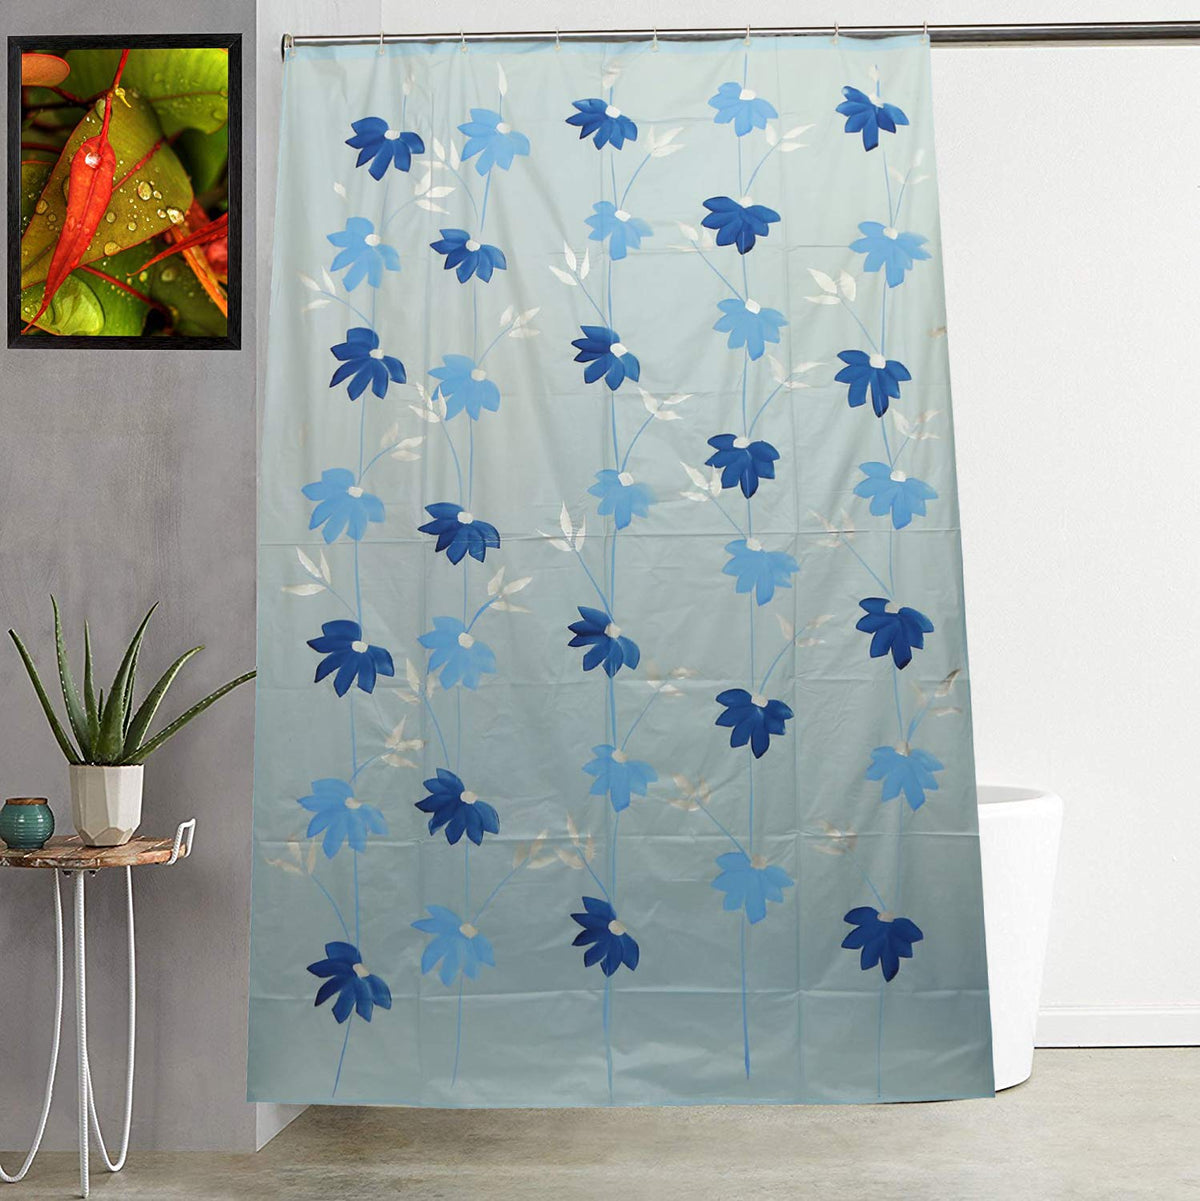 Kuber Industries PVC Floral Shower Curtain with 8 Hooks, Standard, Sky Blue